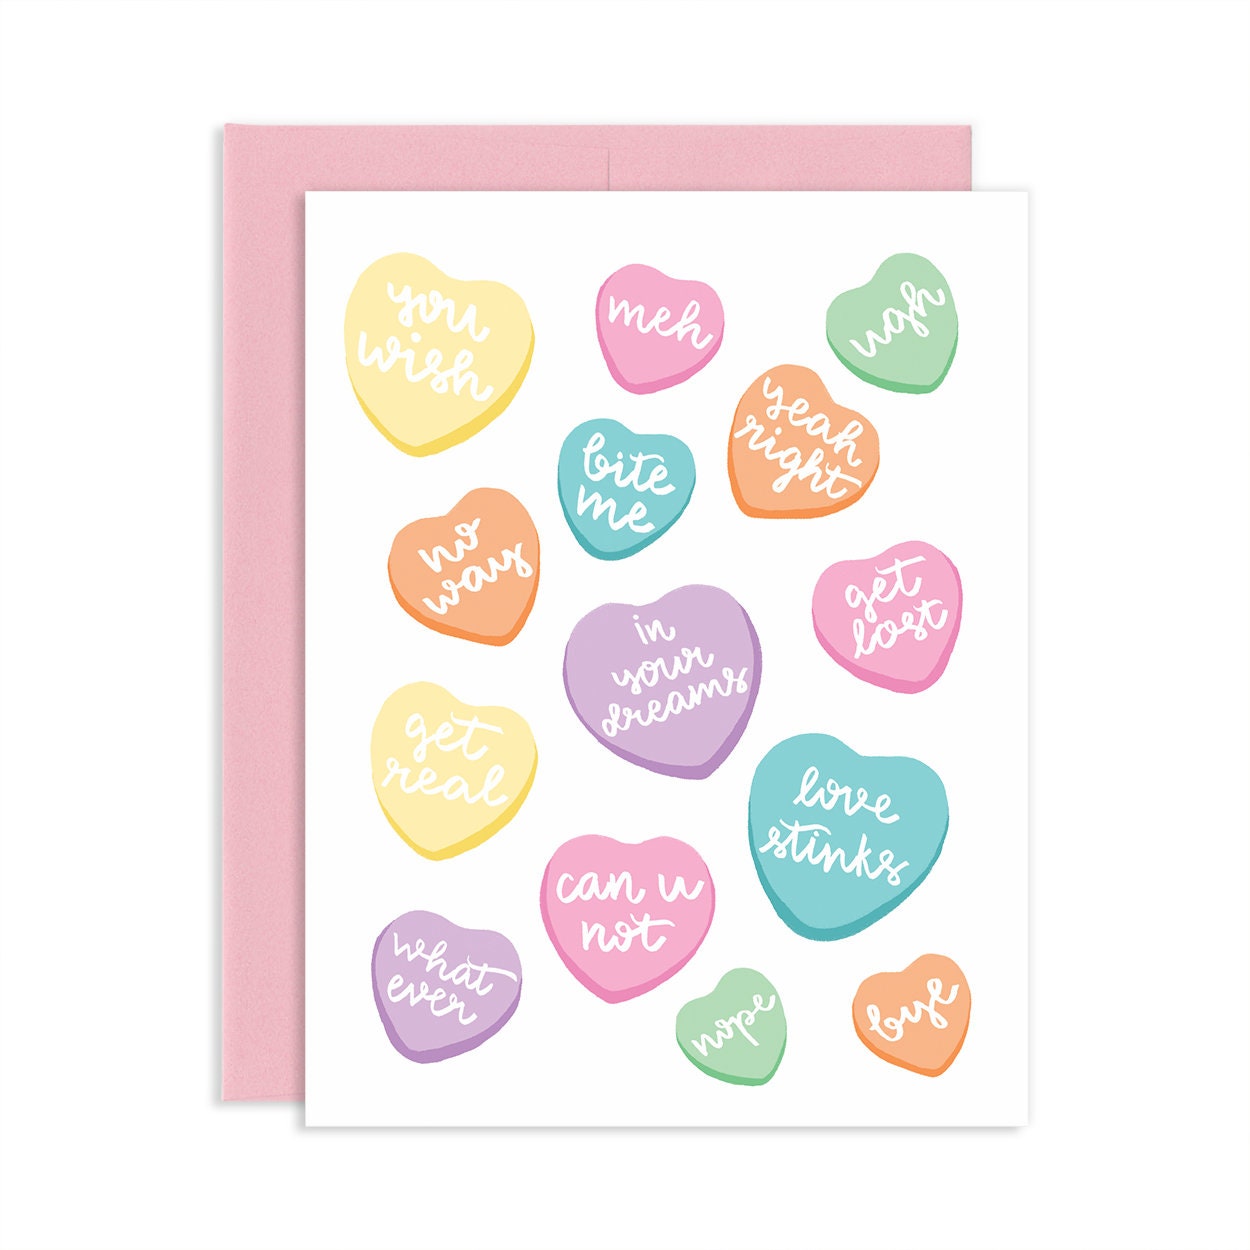 Anti-Valentines Hearts Greeting Card | Old Logo